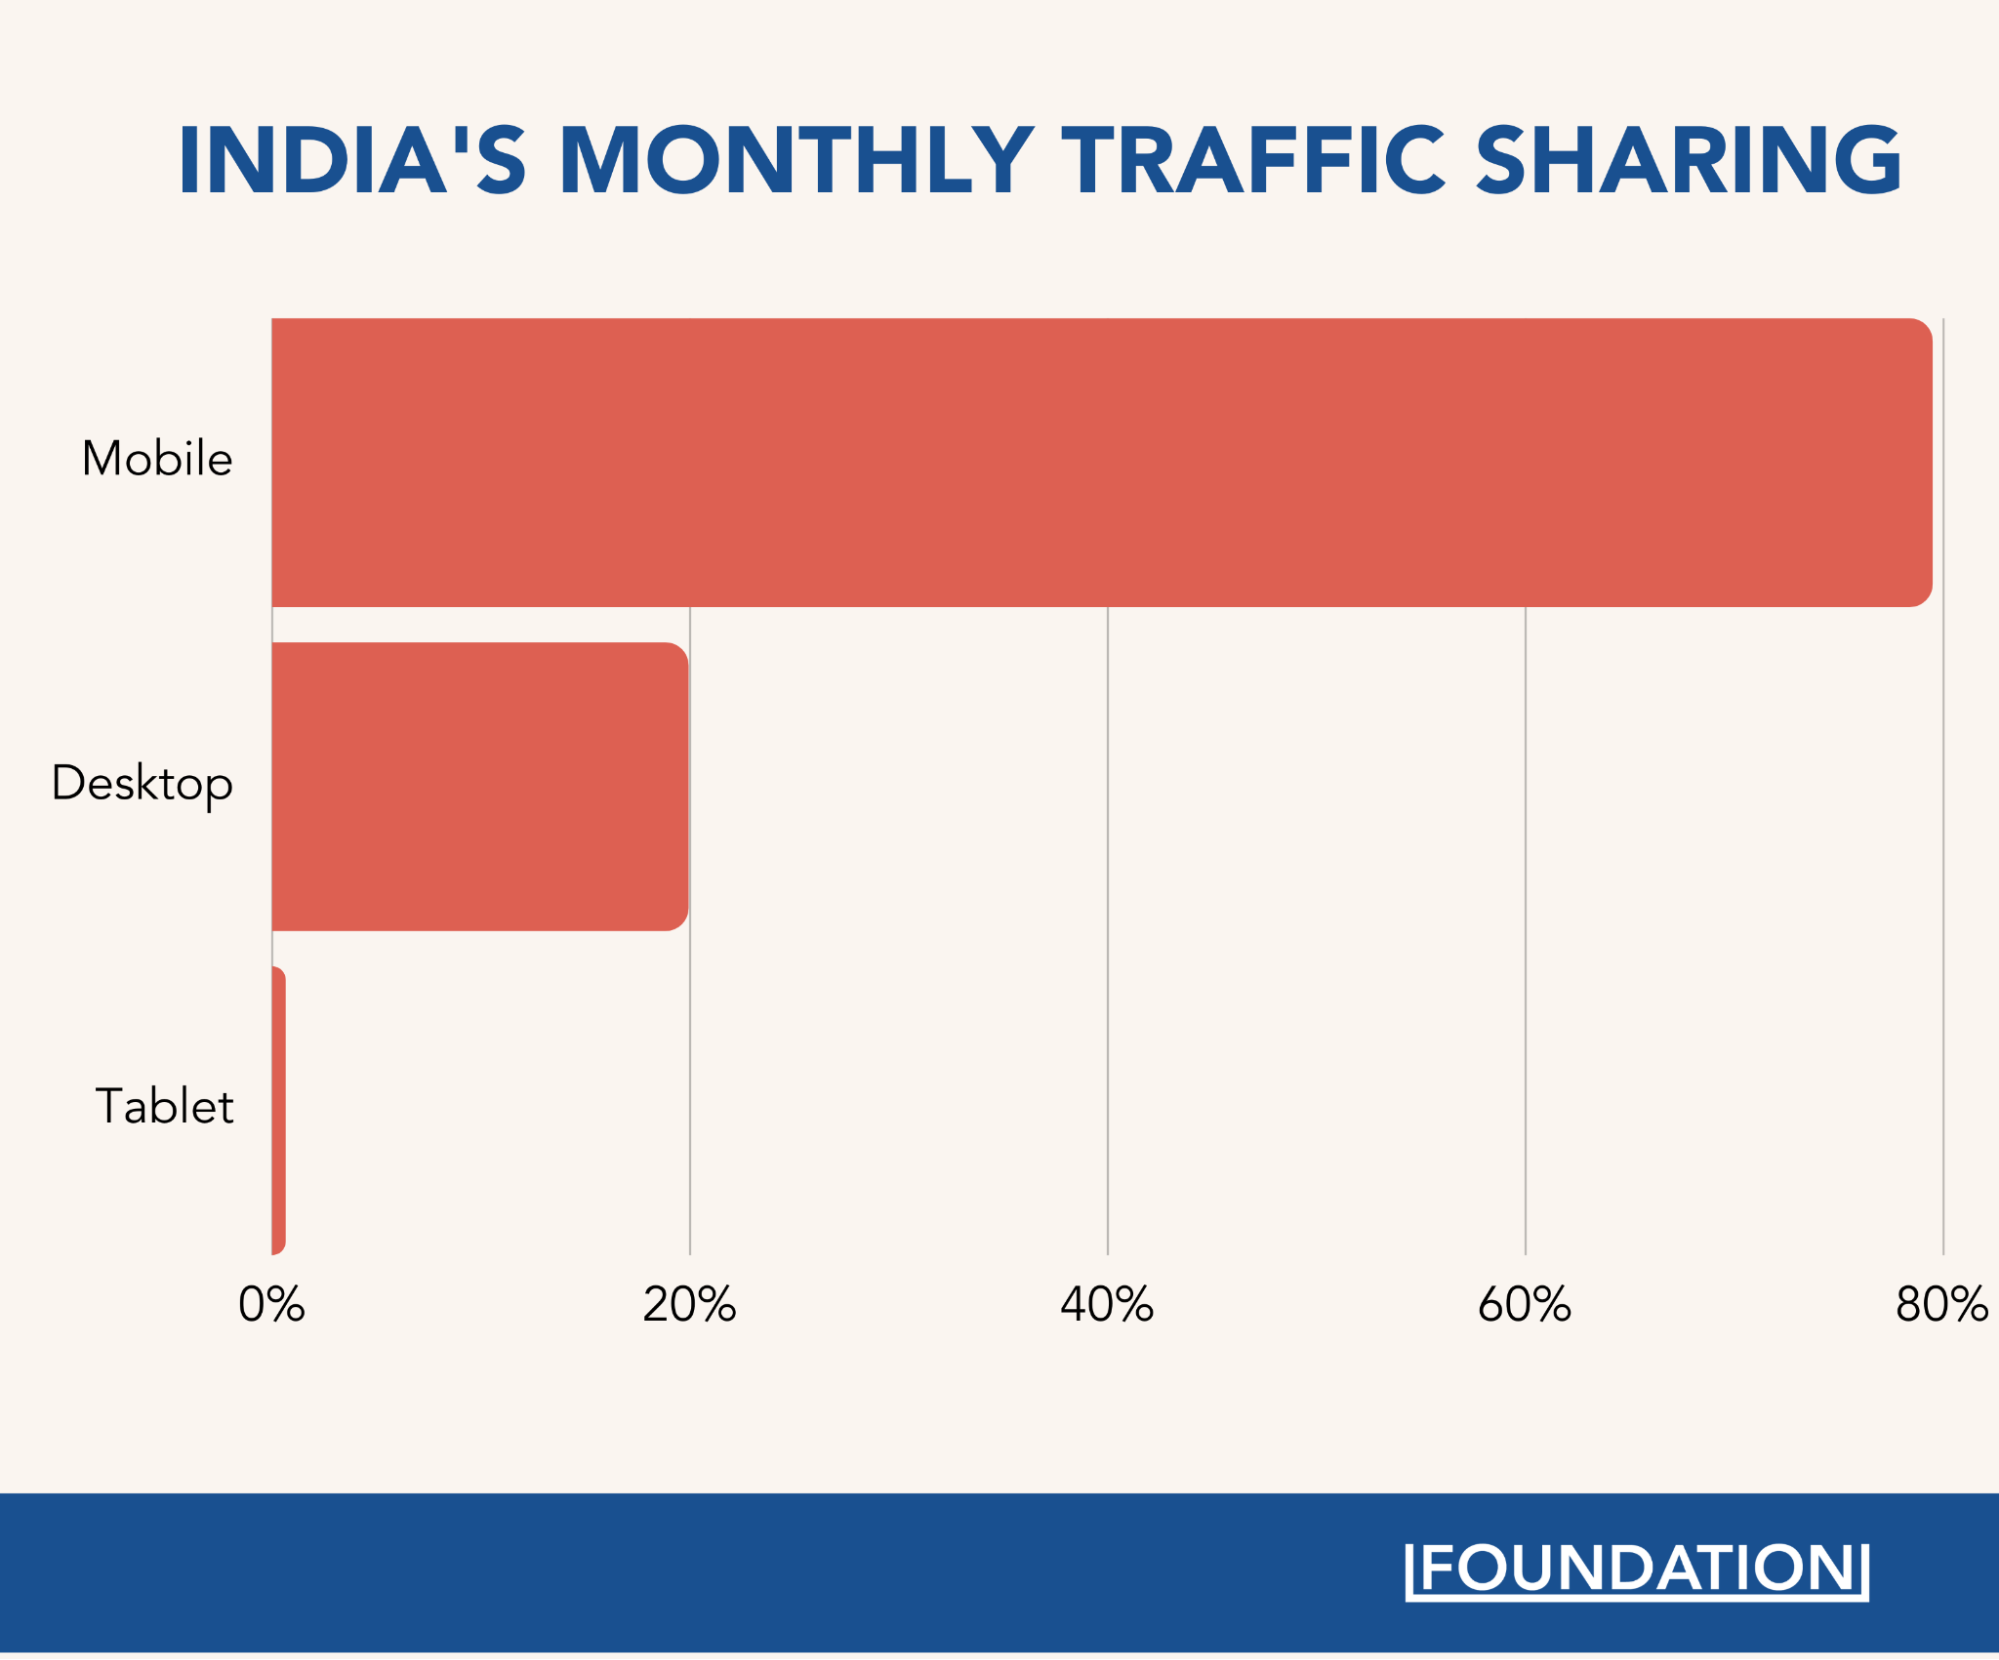 India's monthly traffic sharing